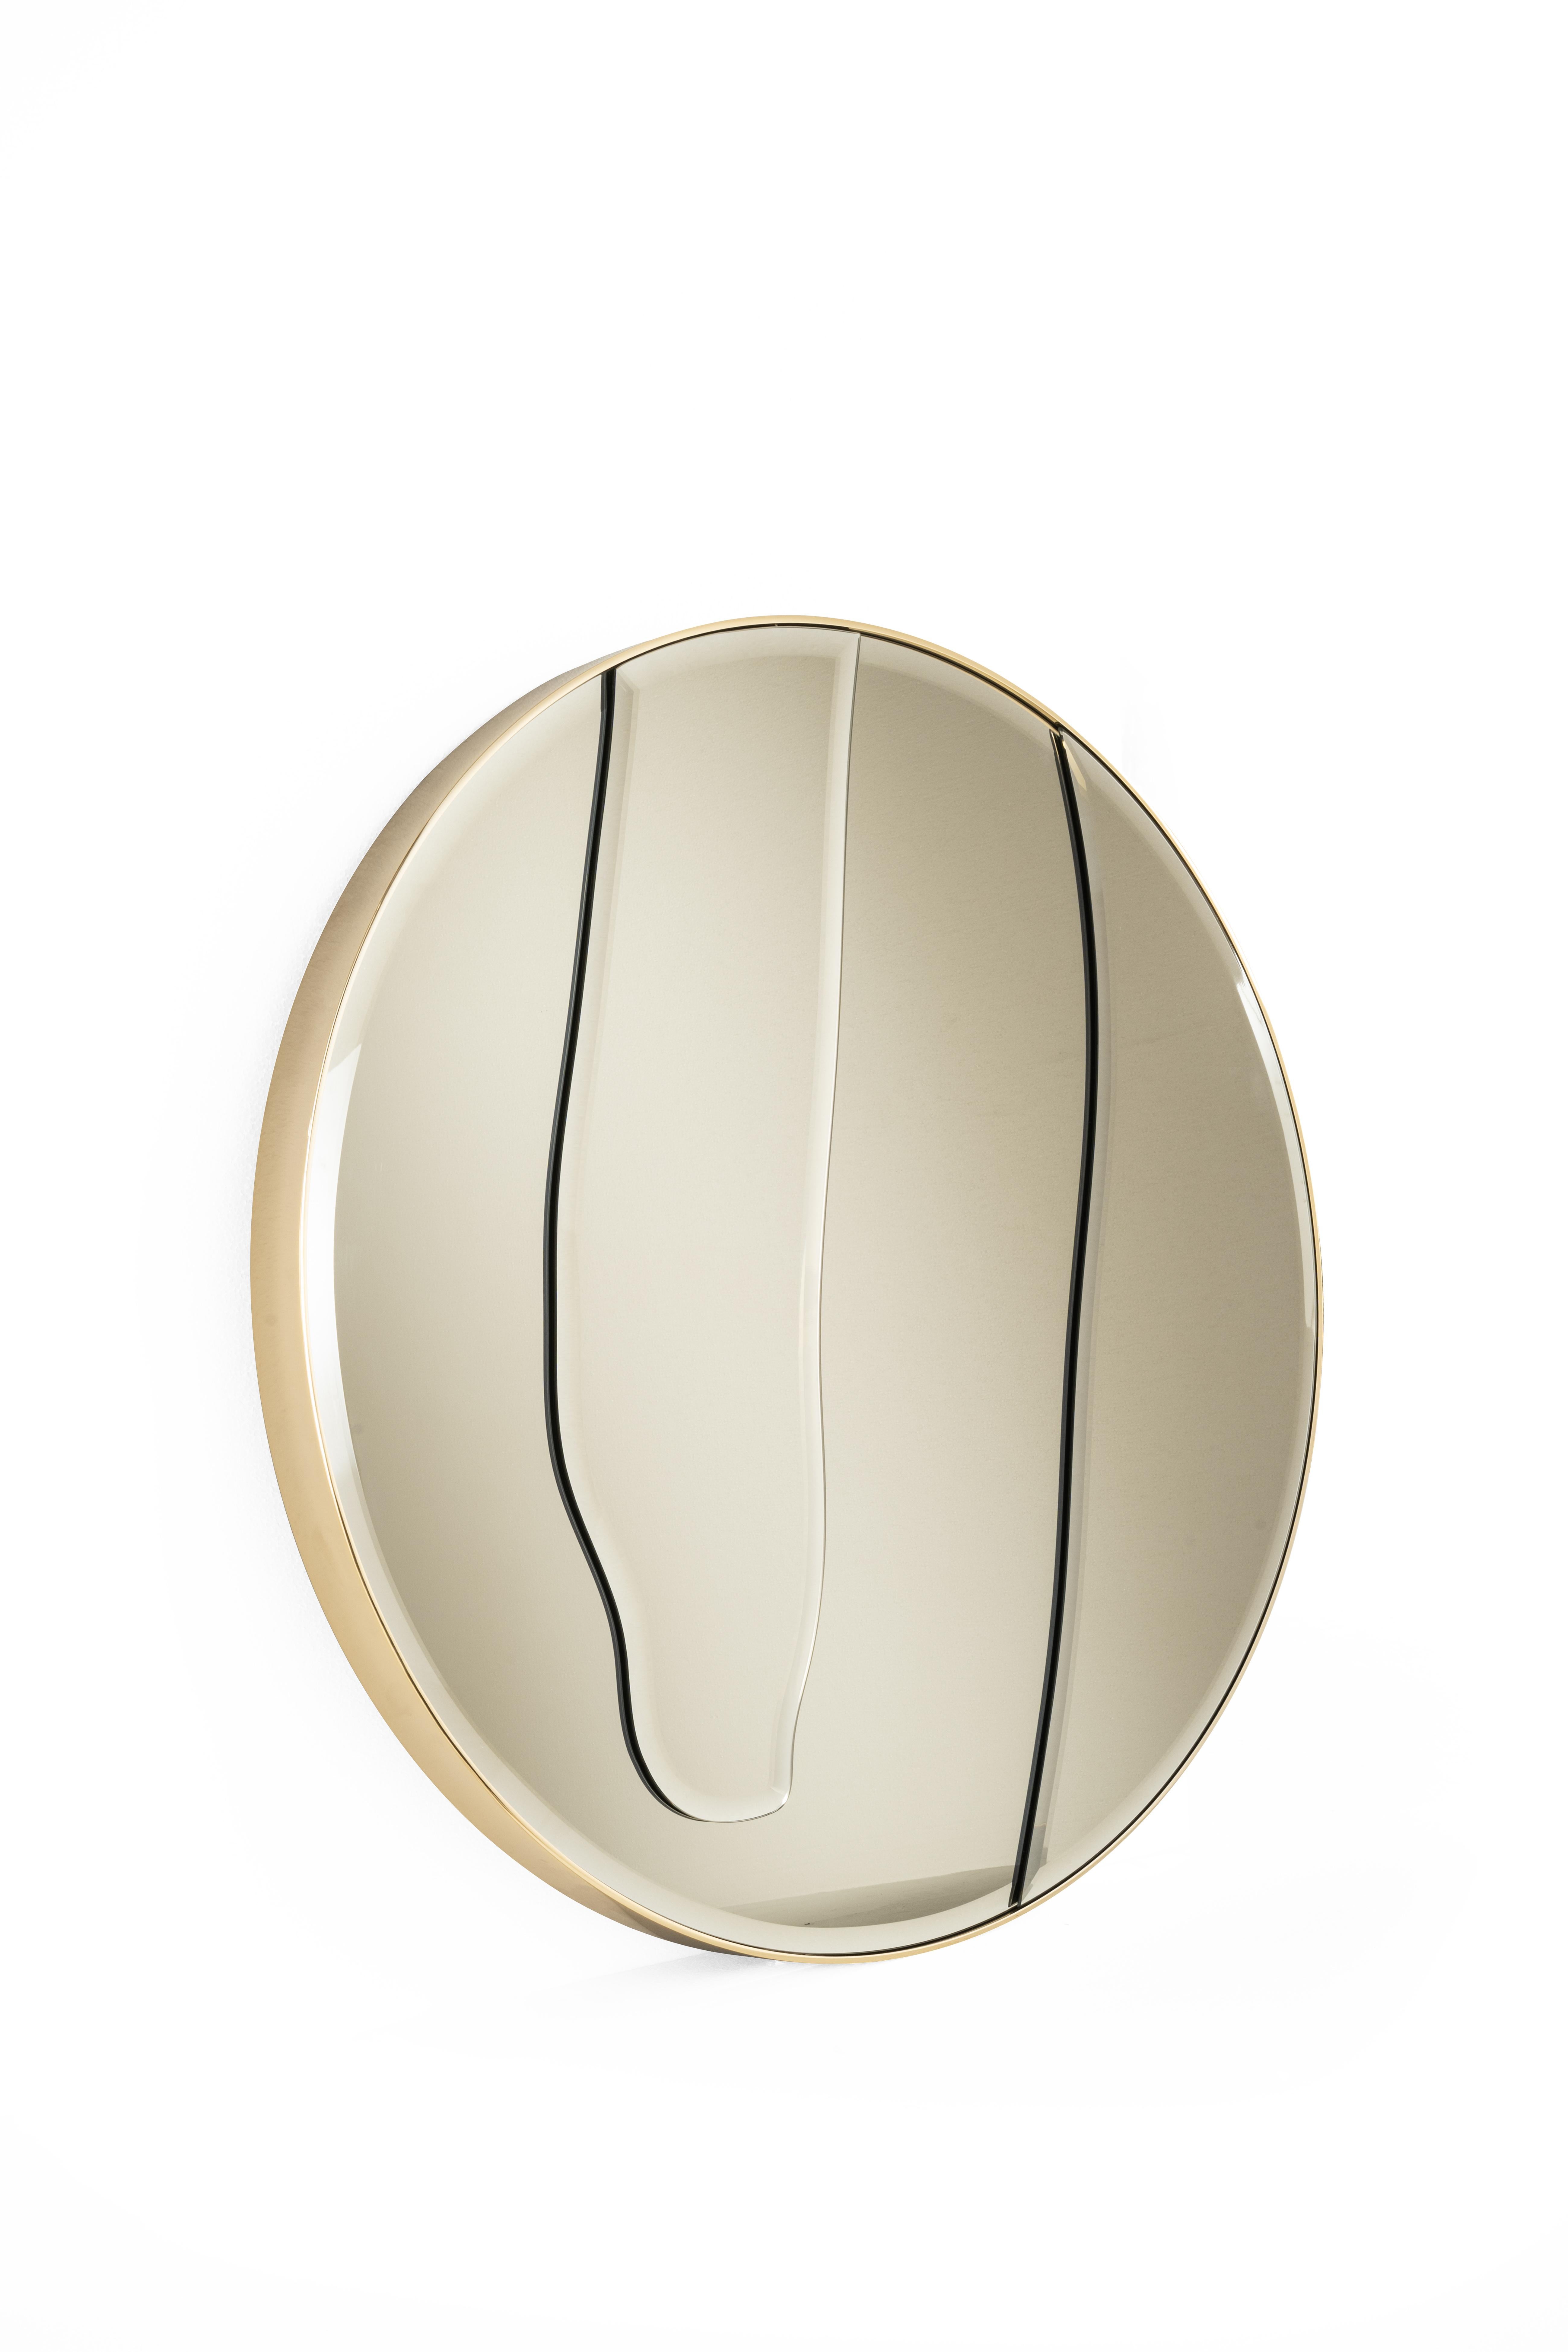 Sahara mirror with structure in MDF. Metal frame with gold finishing. Bevelled bronzed mirror.